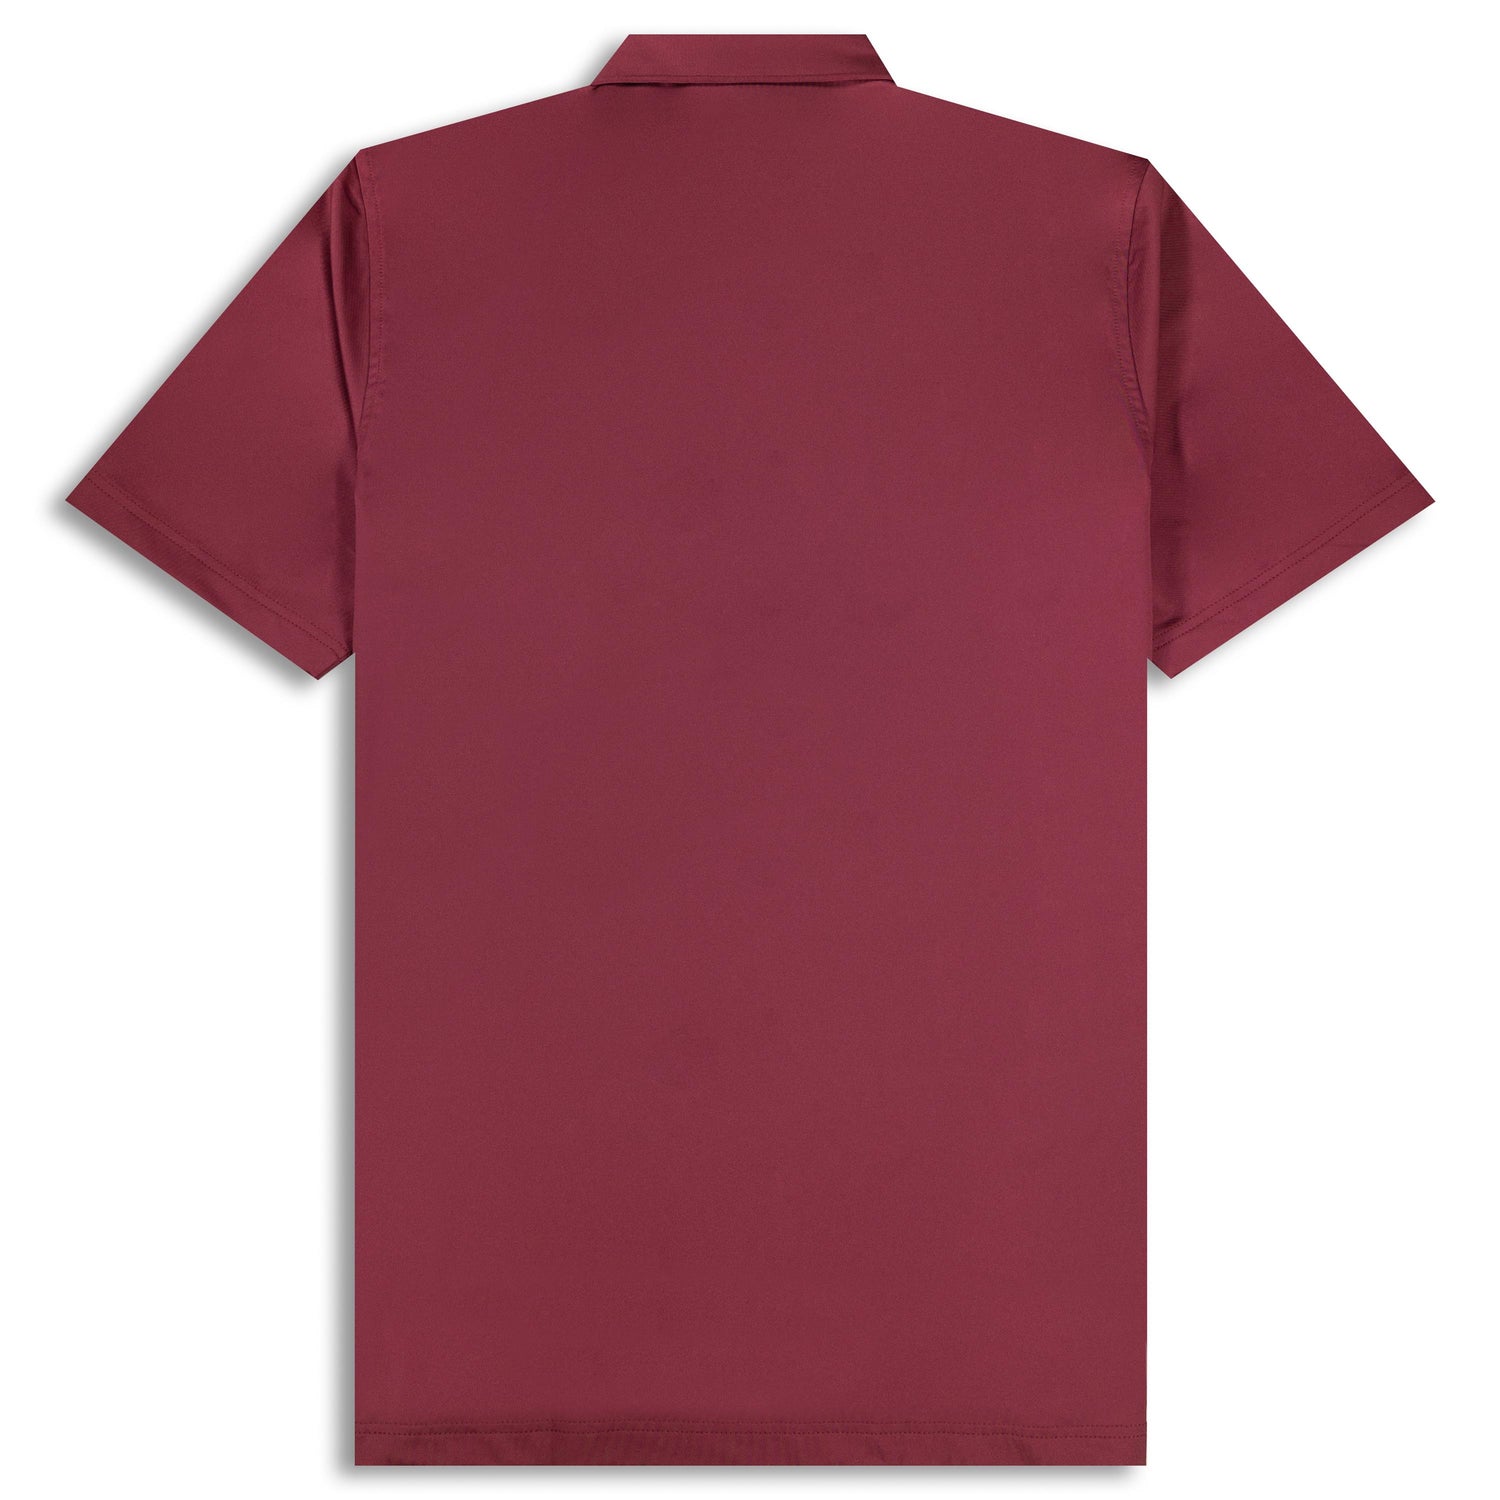 Texas A&M Peter Millar Solid Performance Jersey Polo